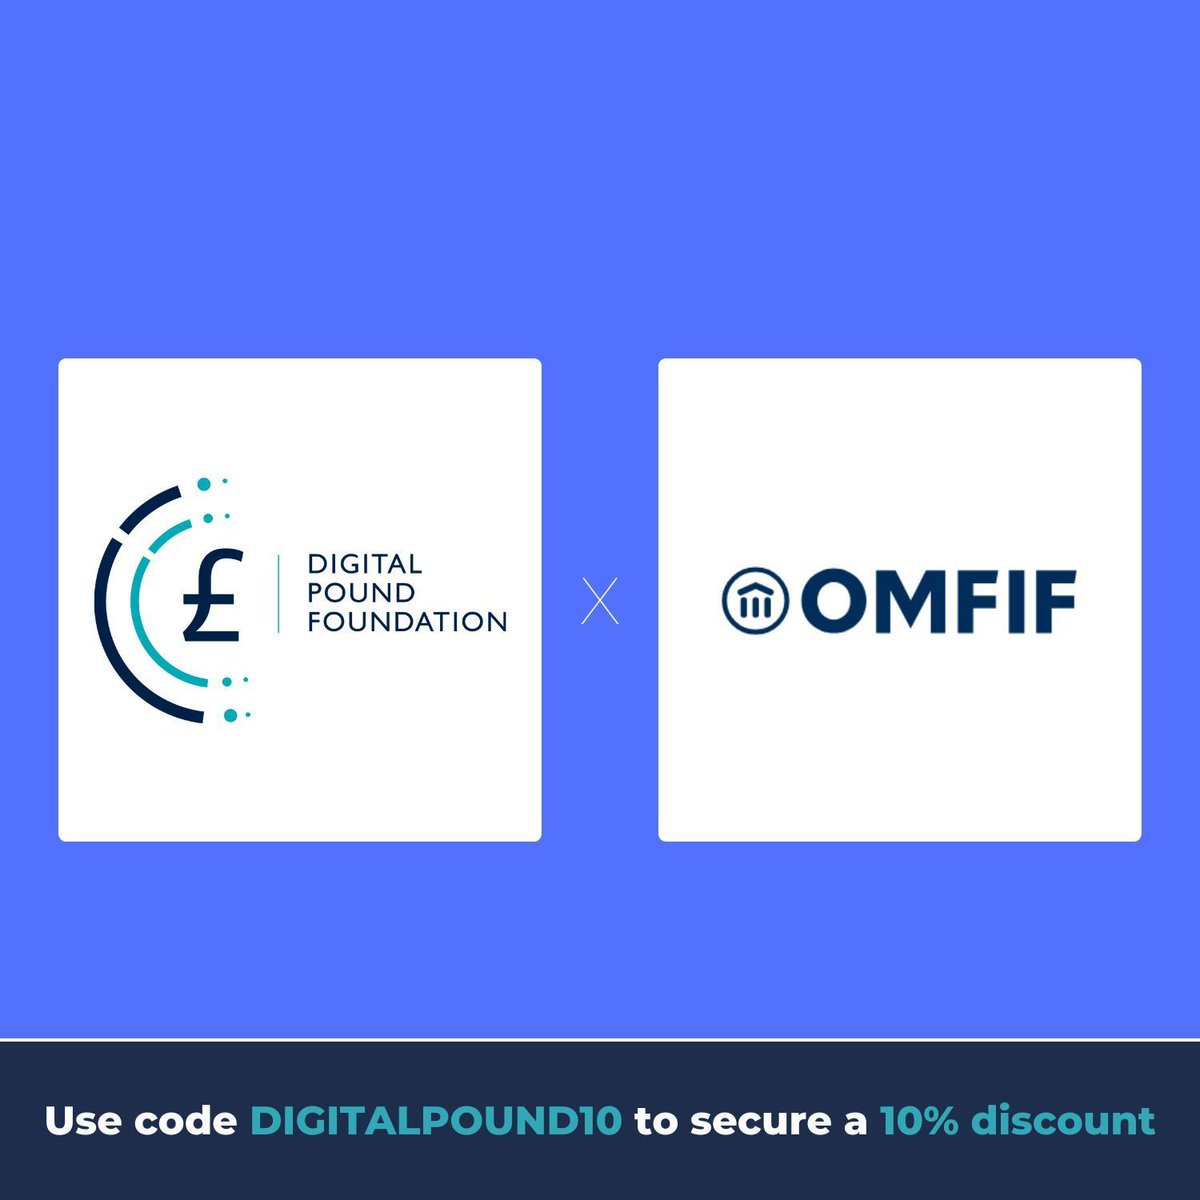 We are proud to be an official partner for the @OMFIF Digital Money Summit 2024. Receive a 10% discount on tickets when using the promo code 'digitalpound10' at checkout 👉 buff.ly/3TDhsLz ... #DigitalMoney #DigitalCurrencies #Fintech #Conference #Event #Discount #Promo